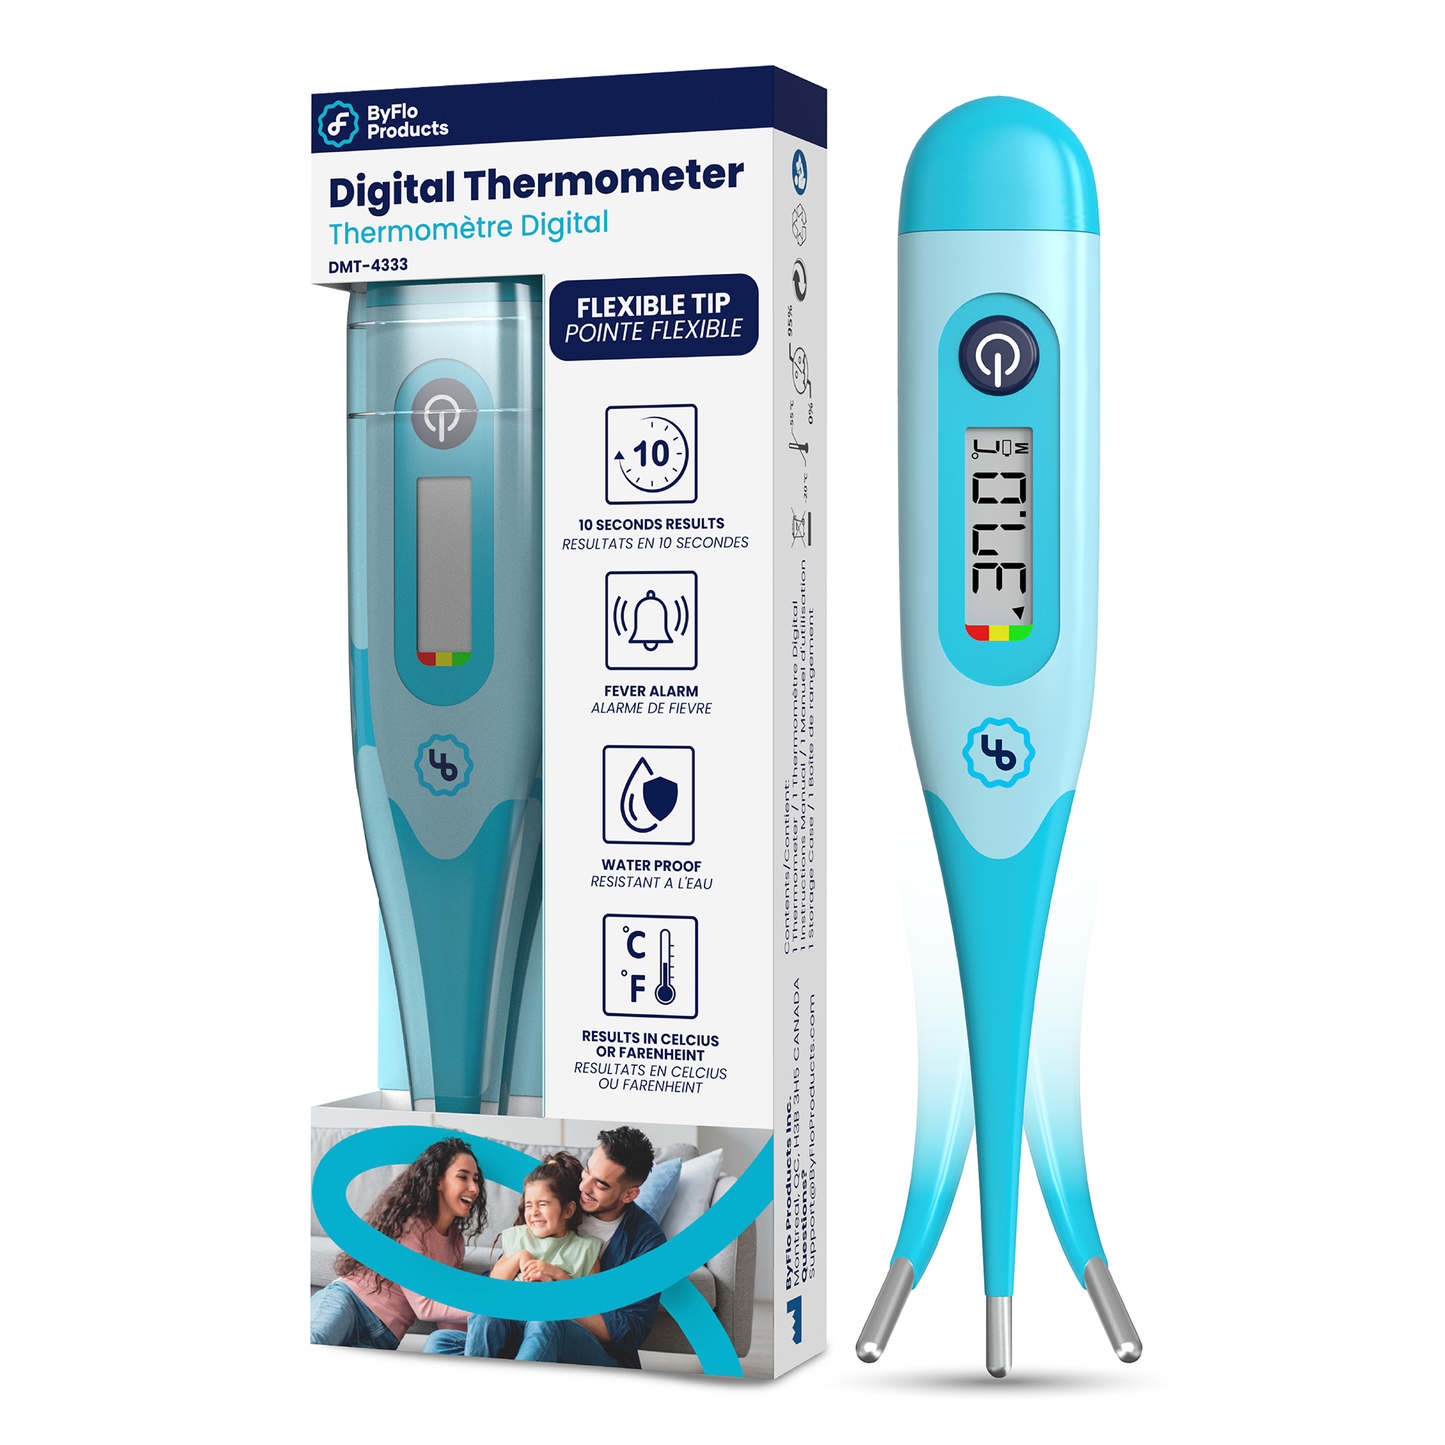 ByFloProducts Digital Thermometer - Flexible Tip - Oral Thermometer, Rectal & Underarm (DMT-4333 Blue)